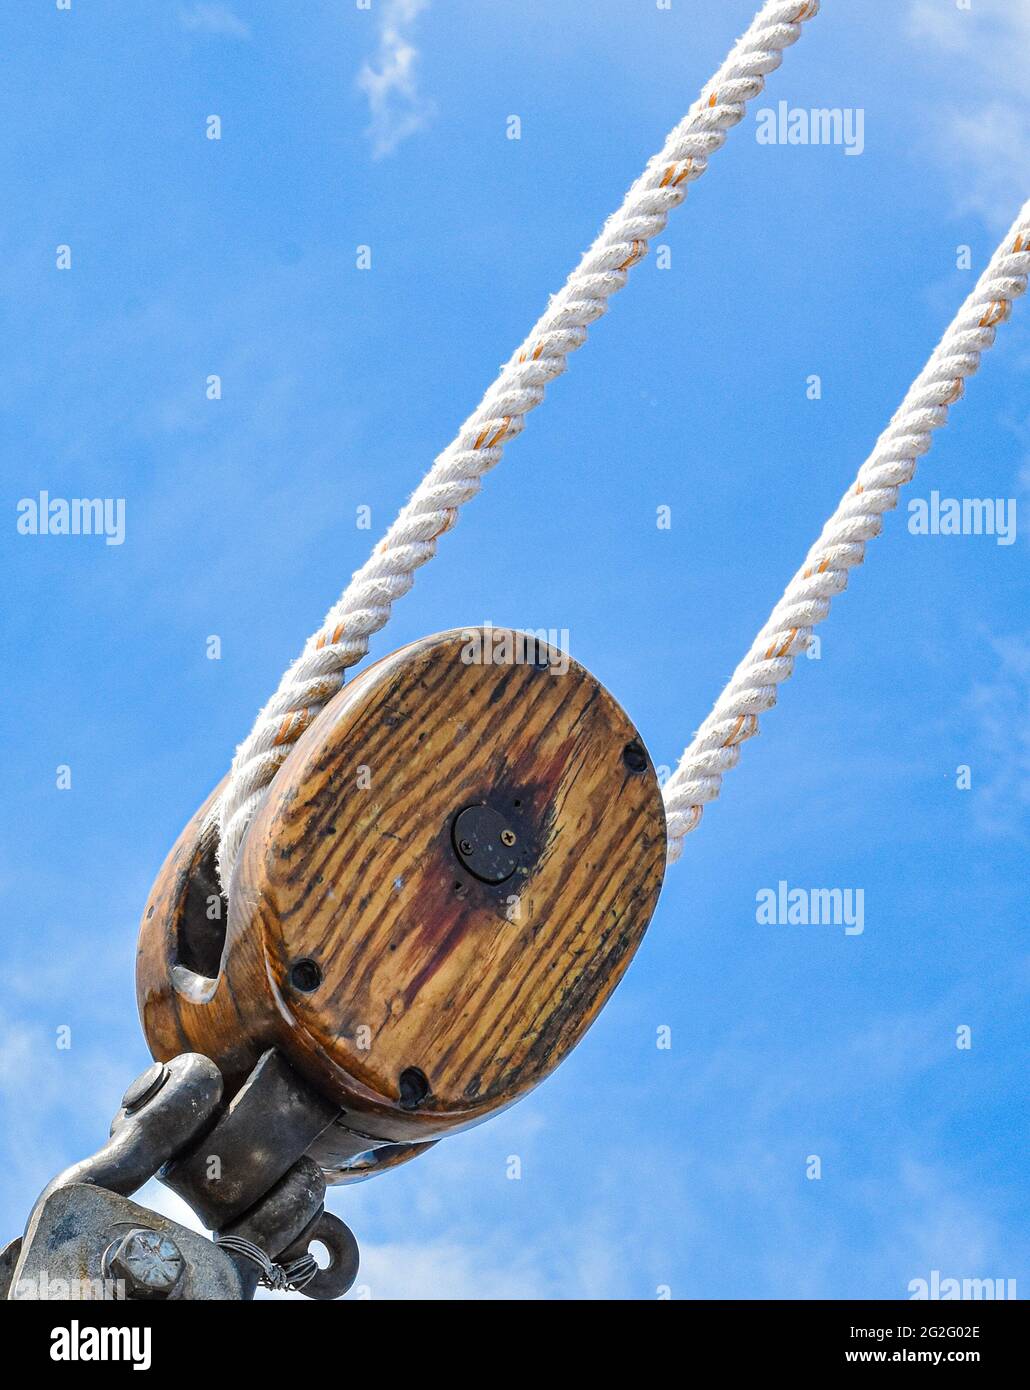 An antique wooden block and tackle on a historic sailing ship. Copy space. Stock Photo